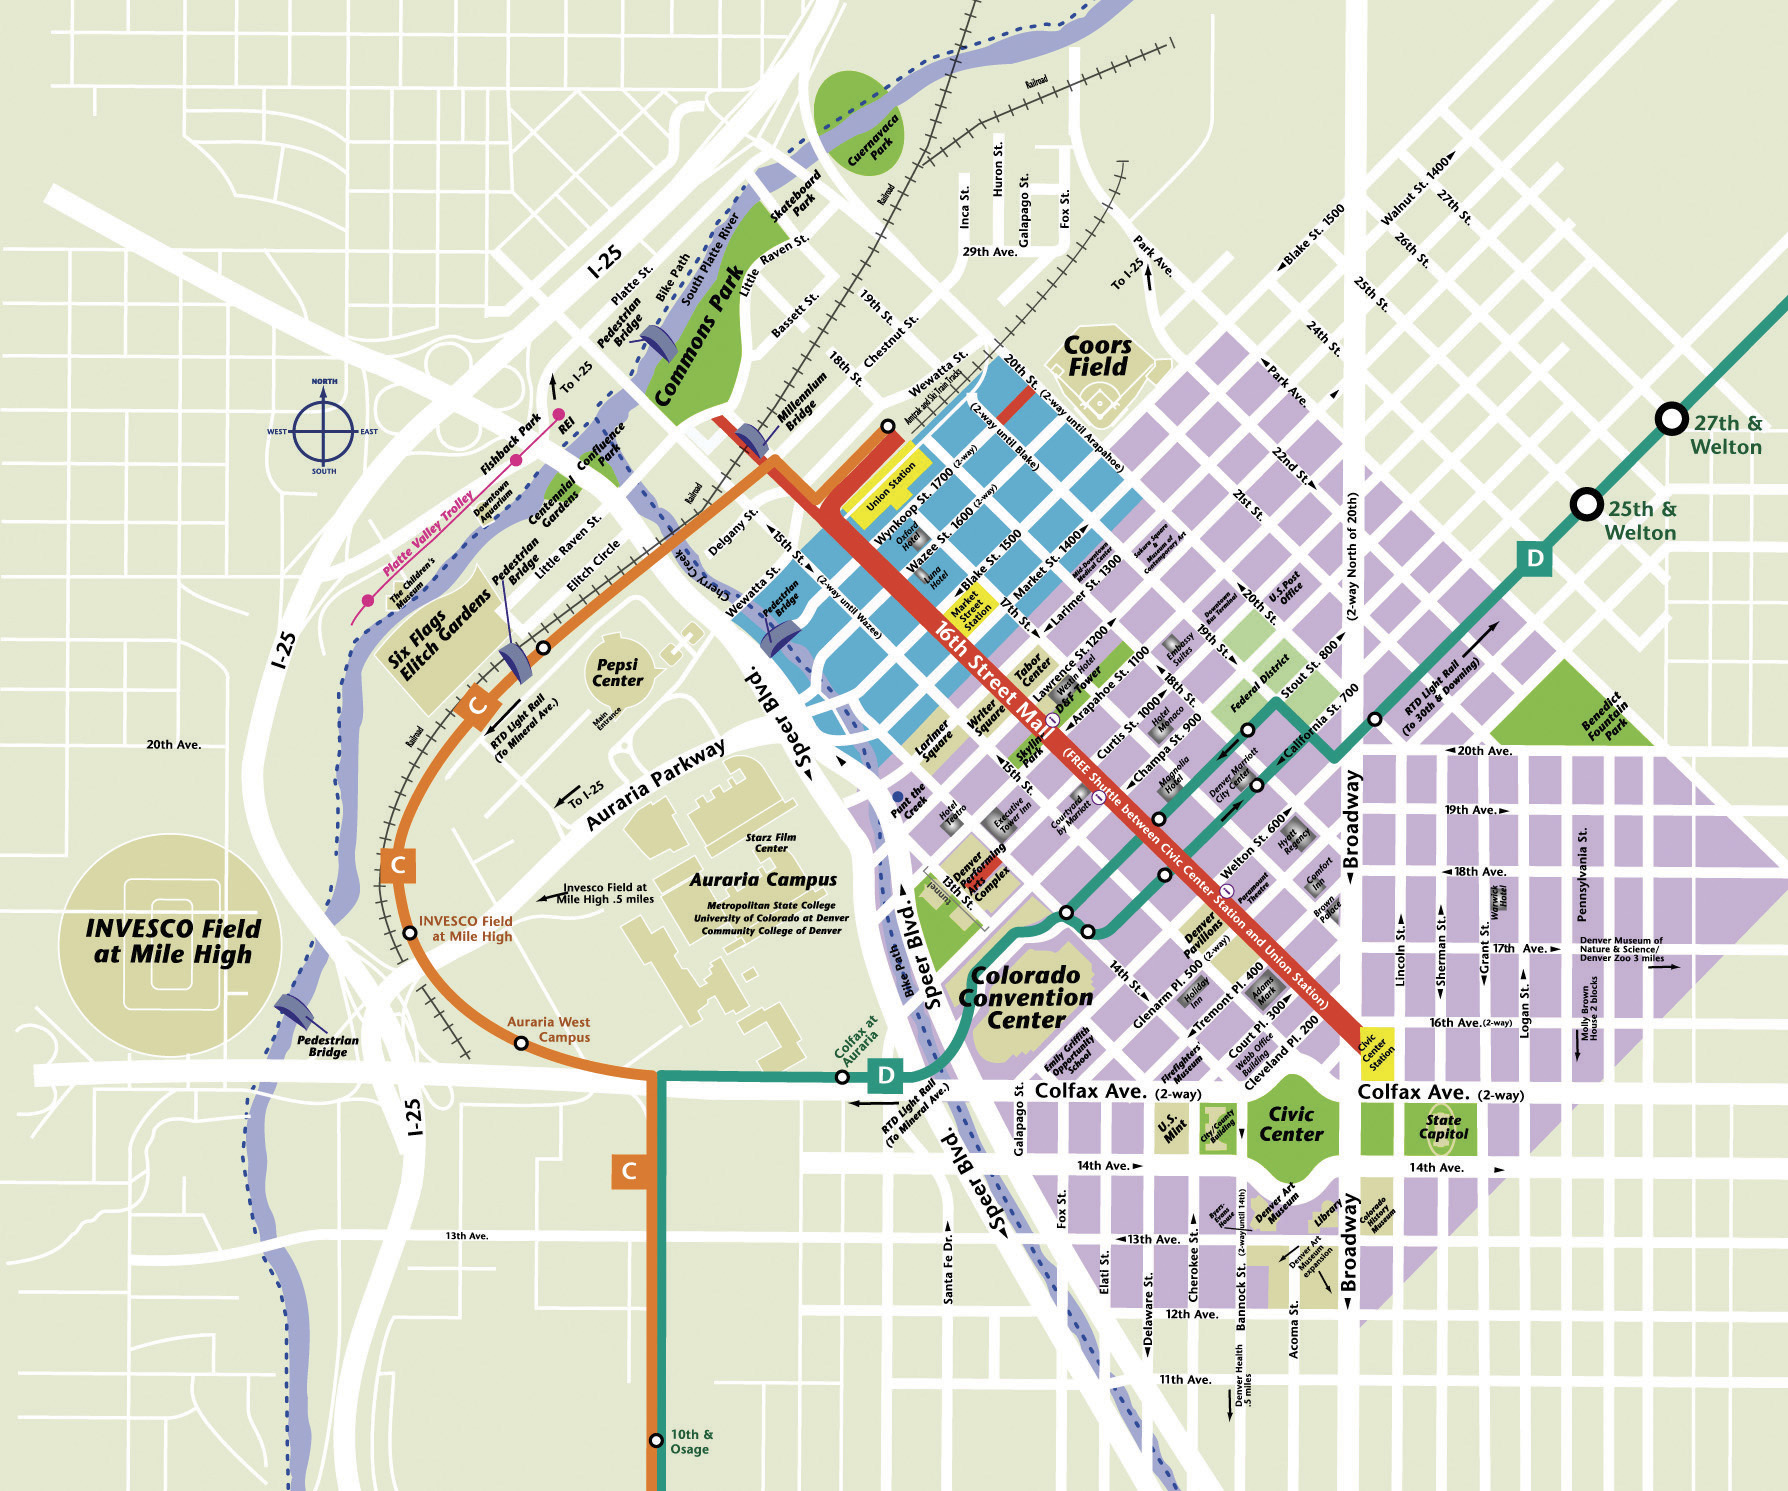 Large Denver Maps for Free Download and Print HighResolution and